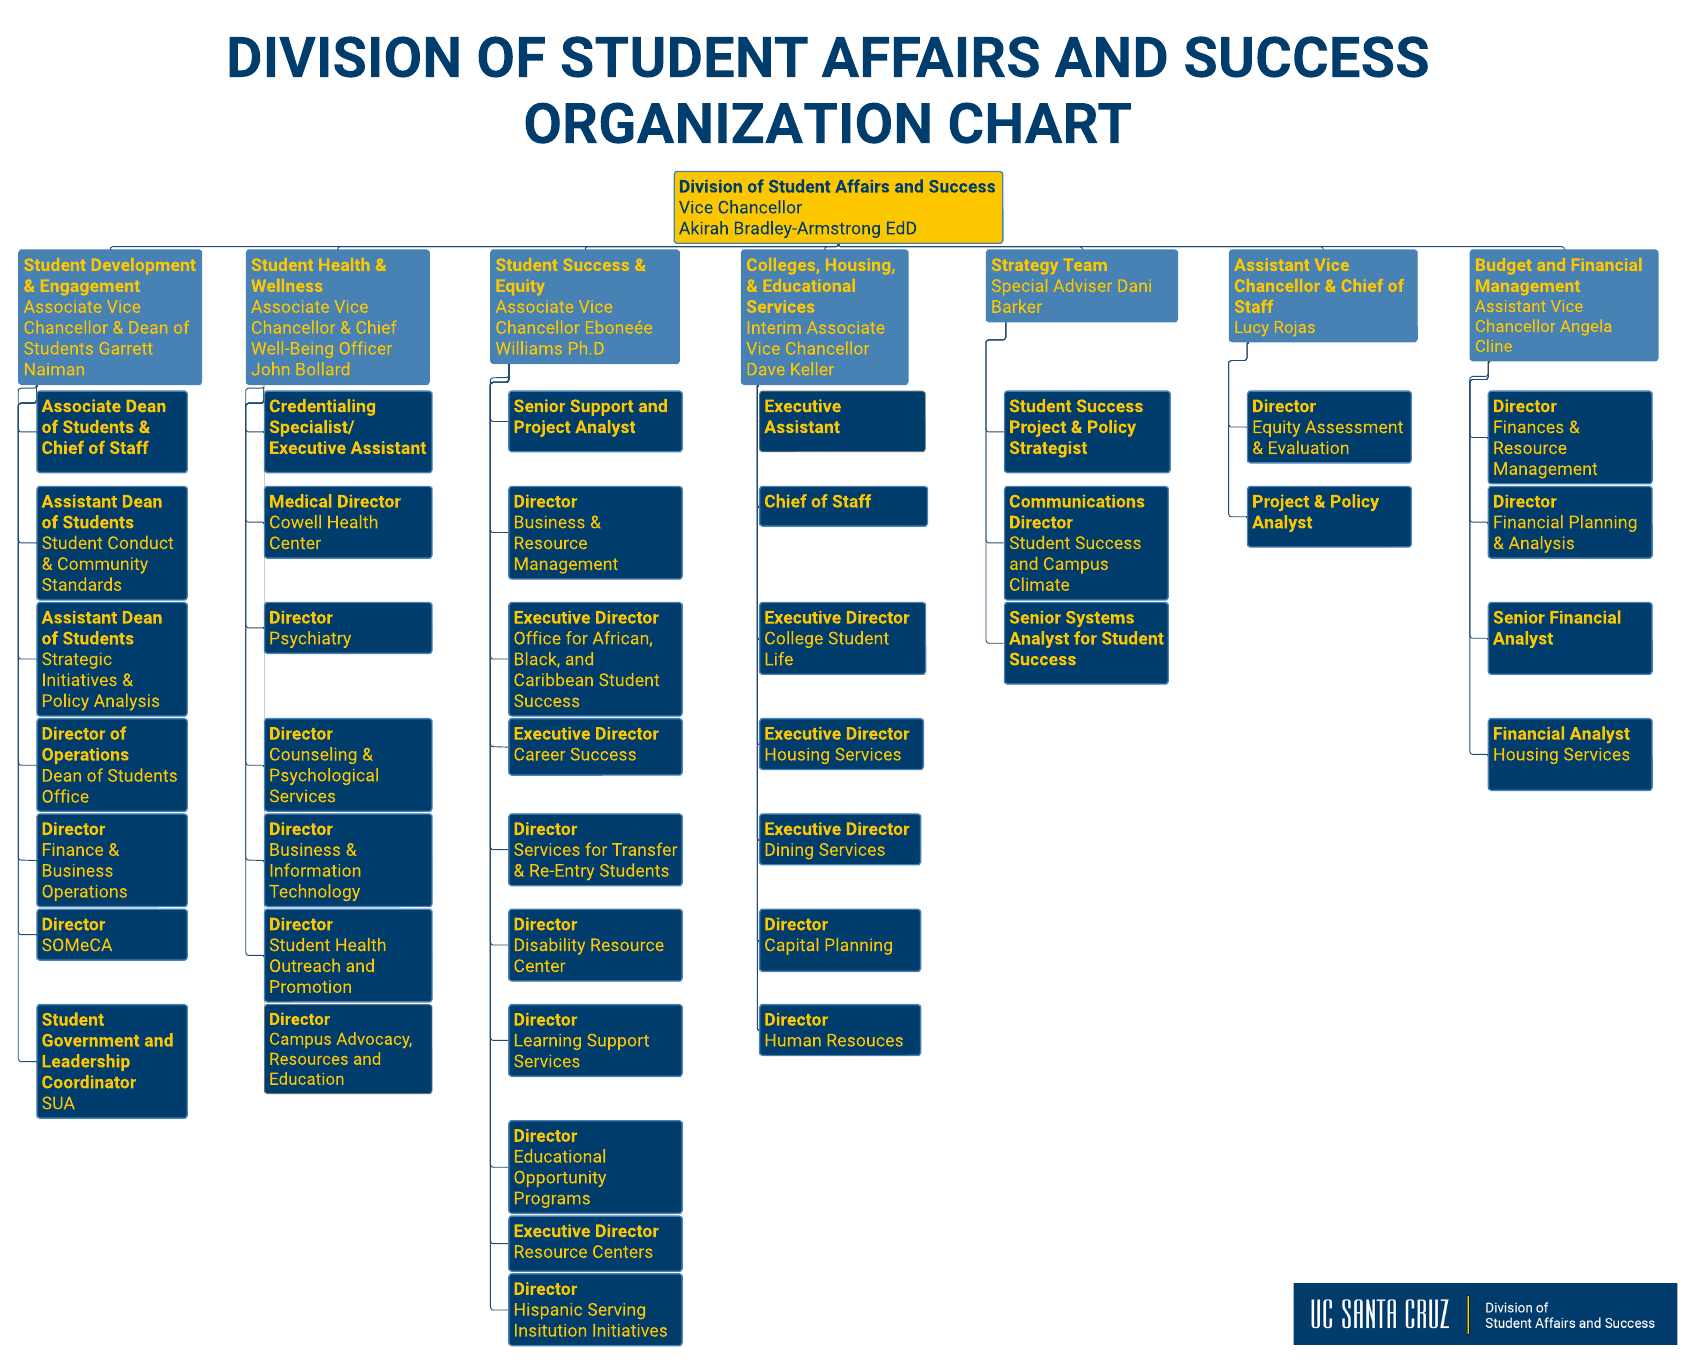 Org chart for DSAS as of Oct 2023